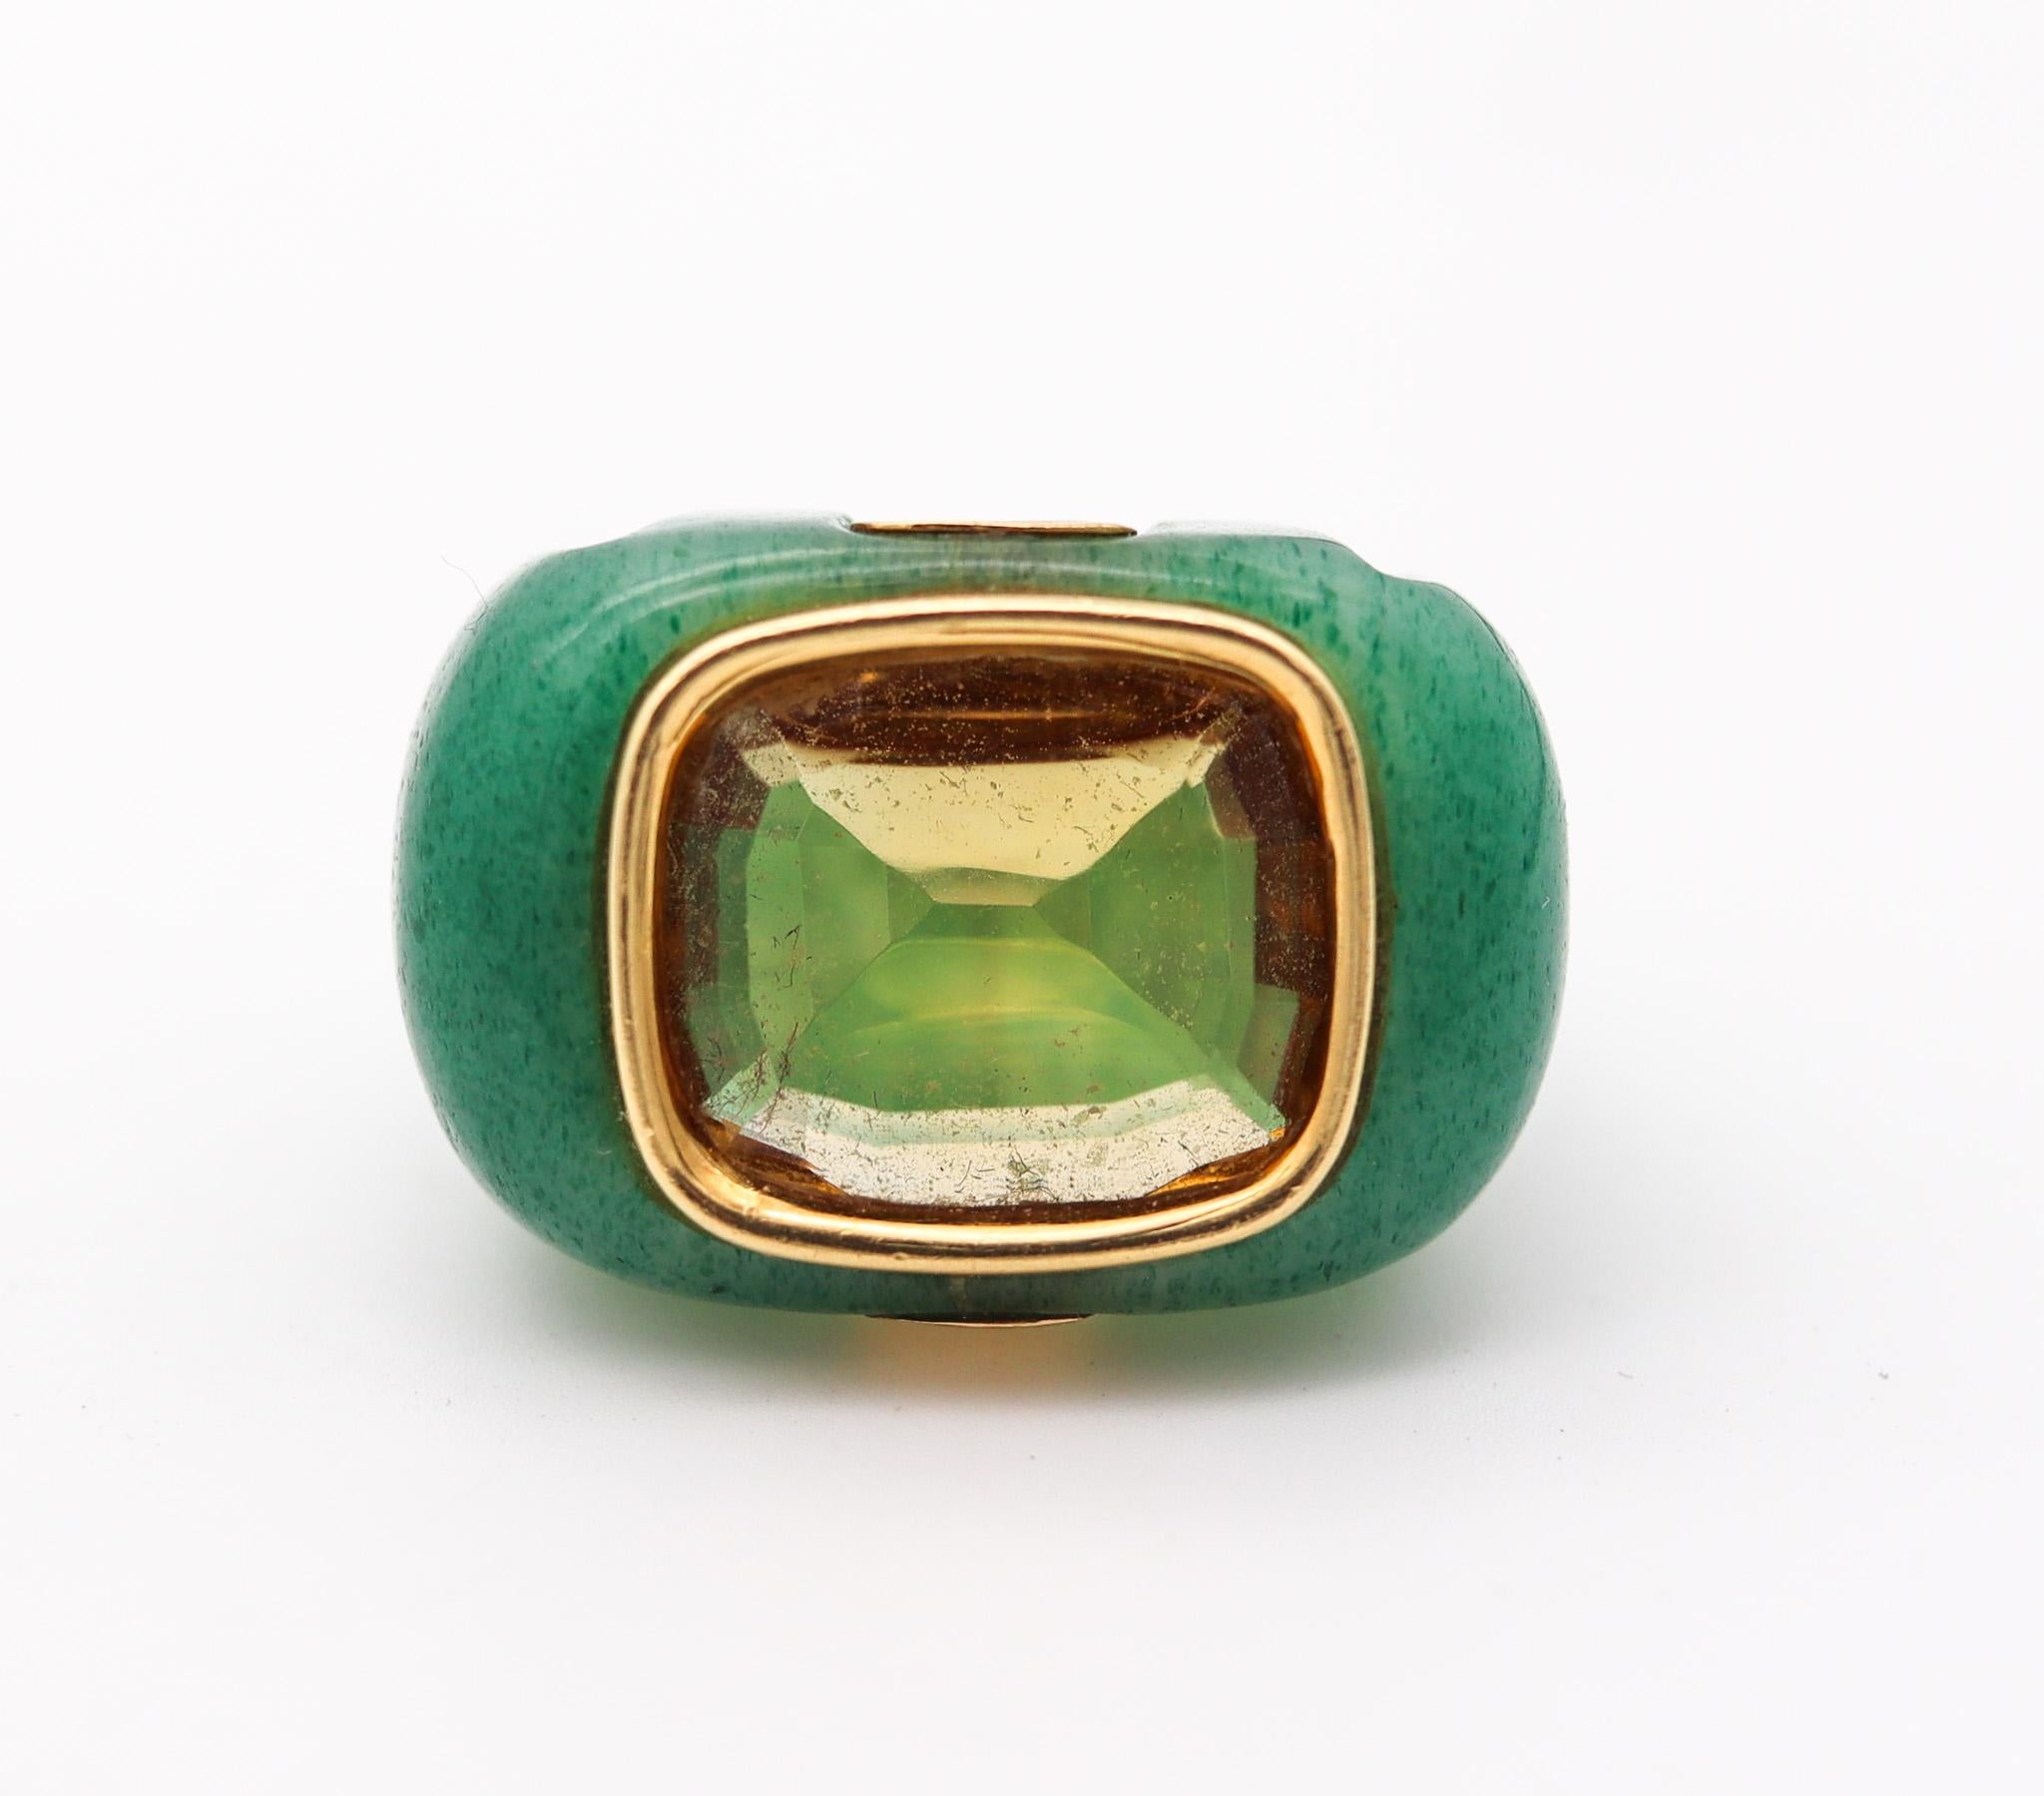 Cocktail ring designed by Seaman Schepps.

Beautiful colorful ring, created by the the jewelry house of Seaman Schepps in carved green aventurine. This rare cocktail ring is decorated with elements crafted in solid yellow of 18 karats with high